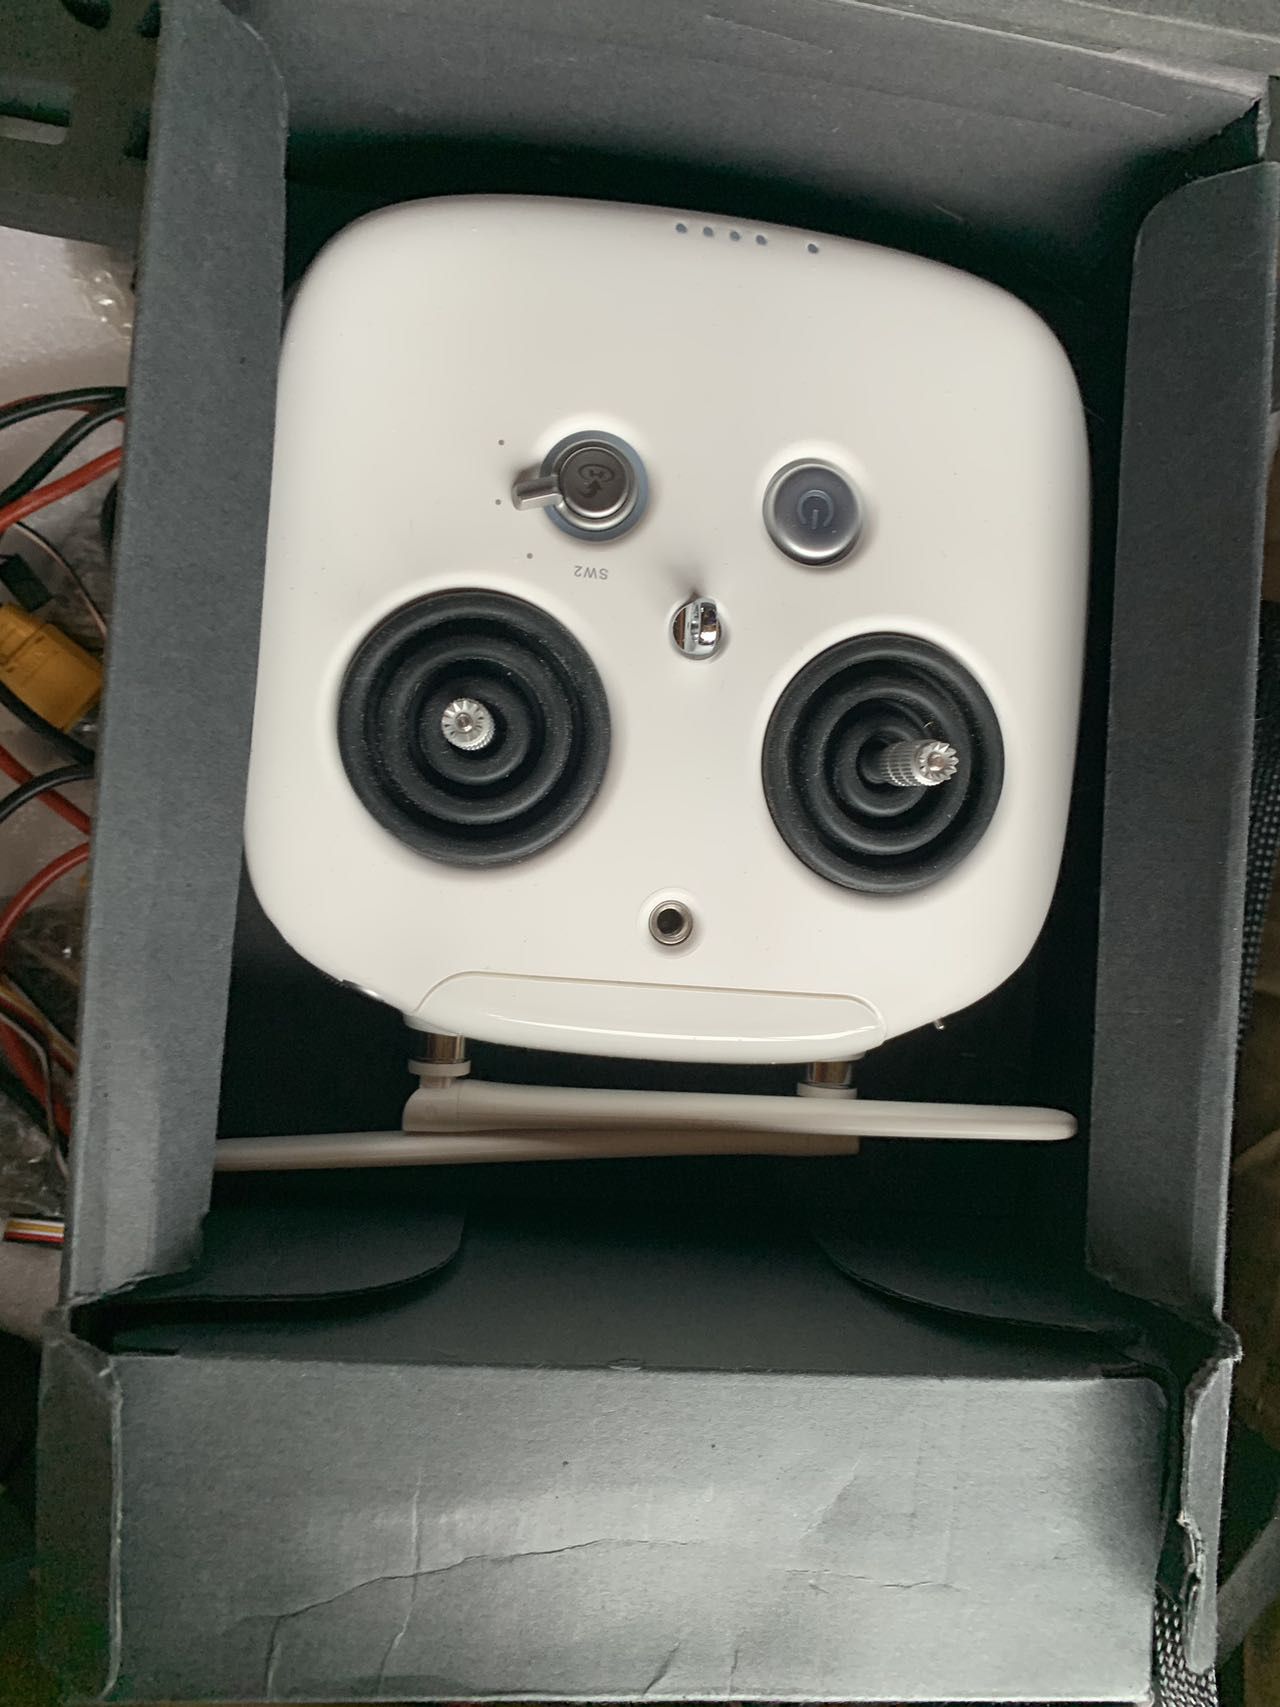 DJI Agricultural Drone Spare Parts for Sale